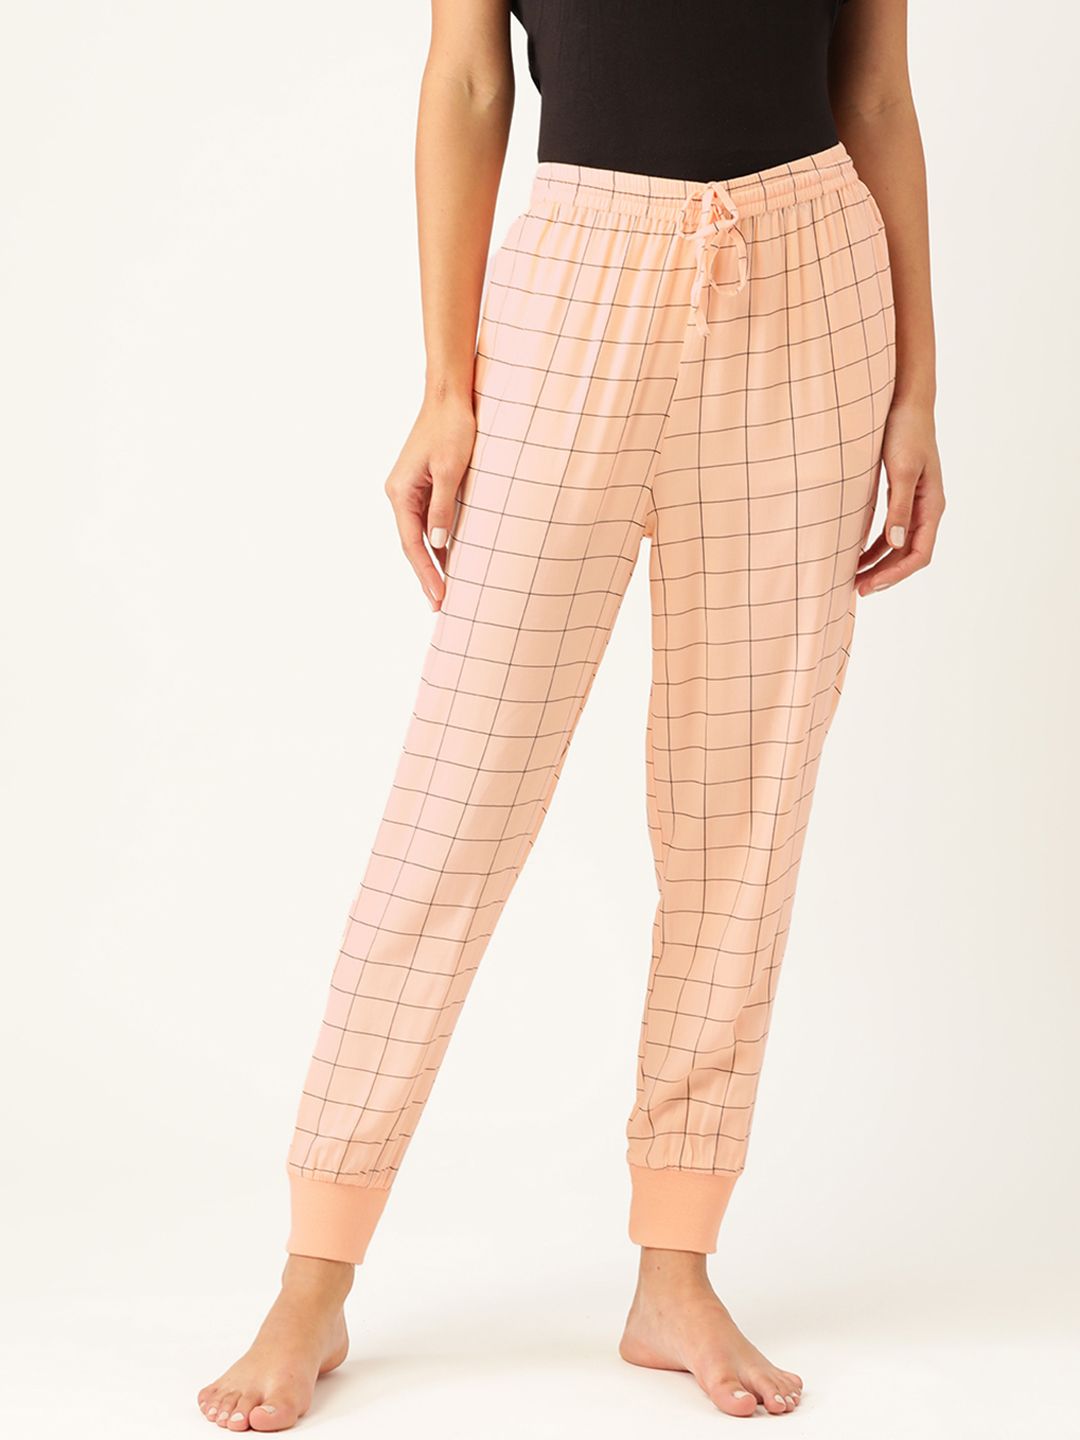 ETC Women Pink & Black Checked Joggers Lounge Pants Price in India